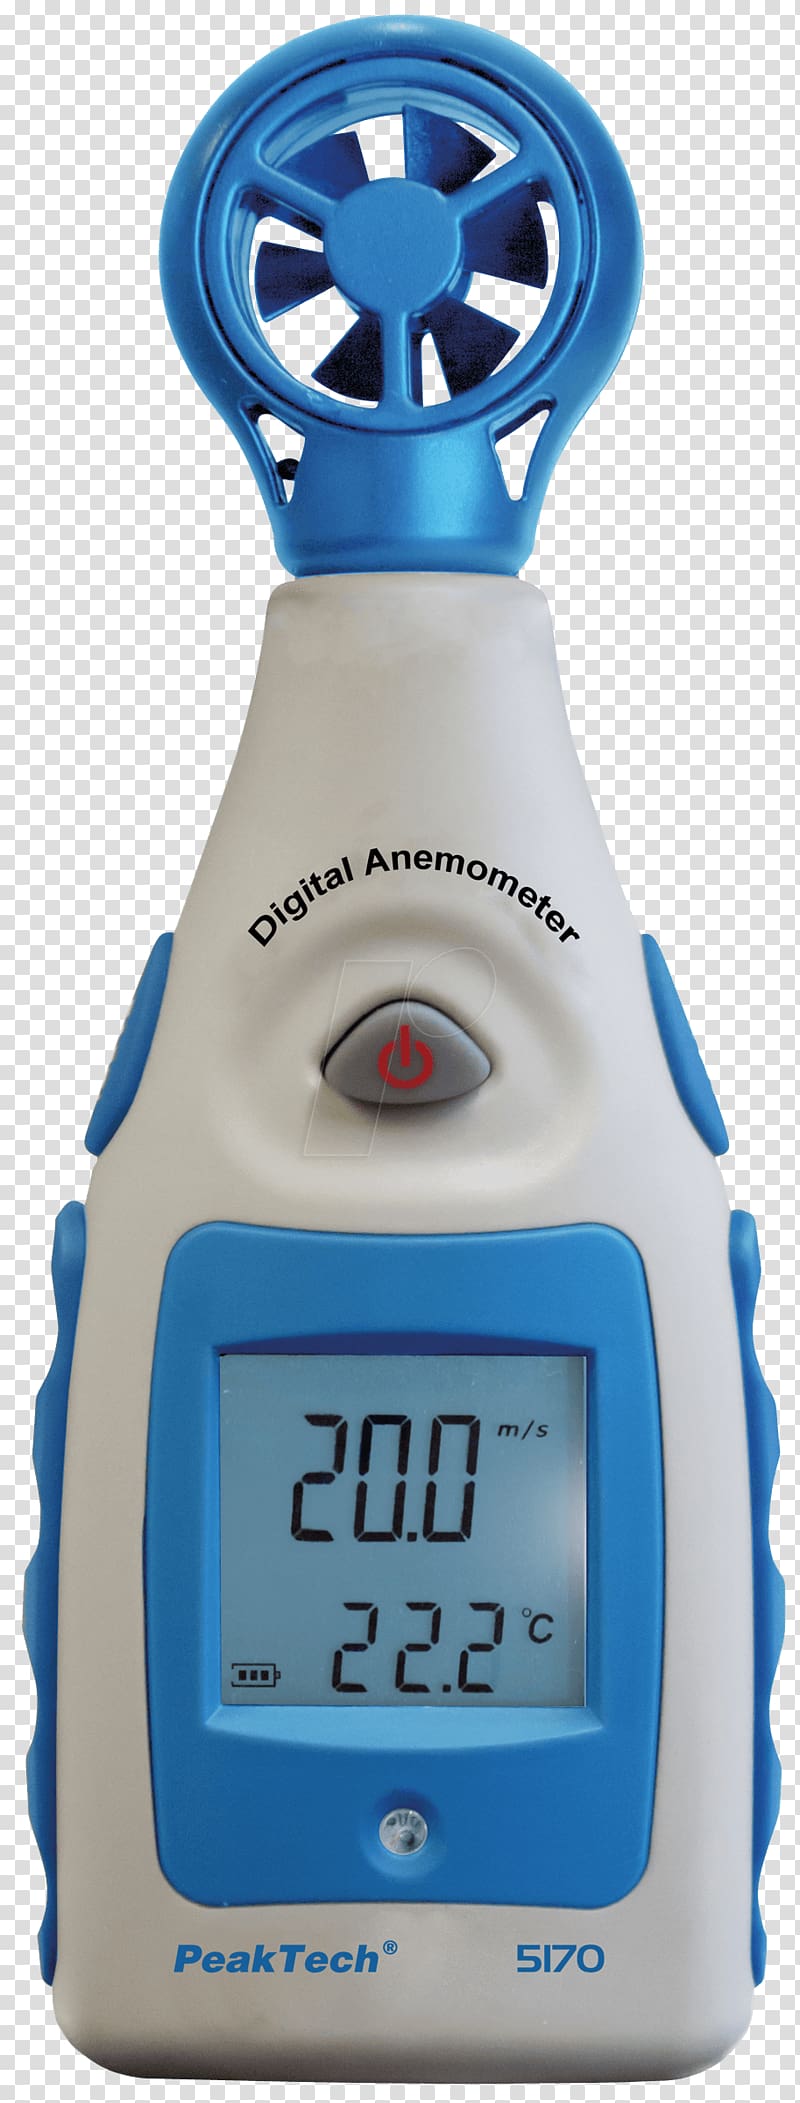 Vane anemometer PEAKTECH 5170 Thermometer Measurement Gauge, anemometer transparent background PNG clipart